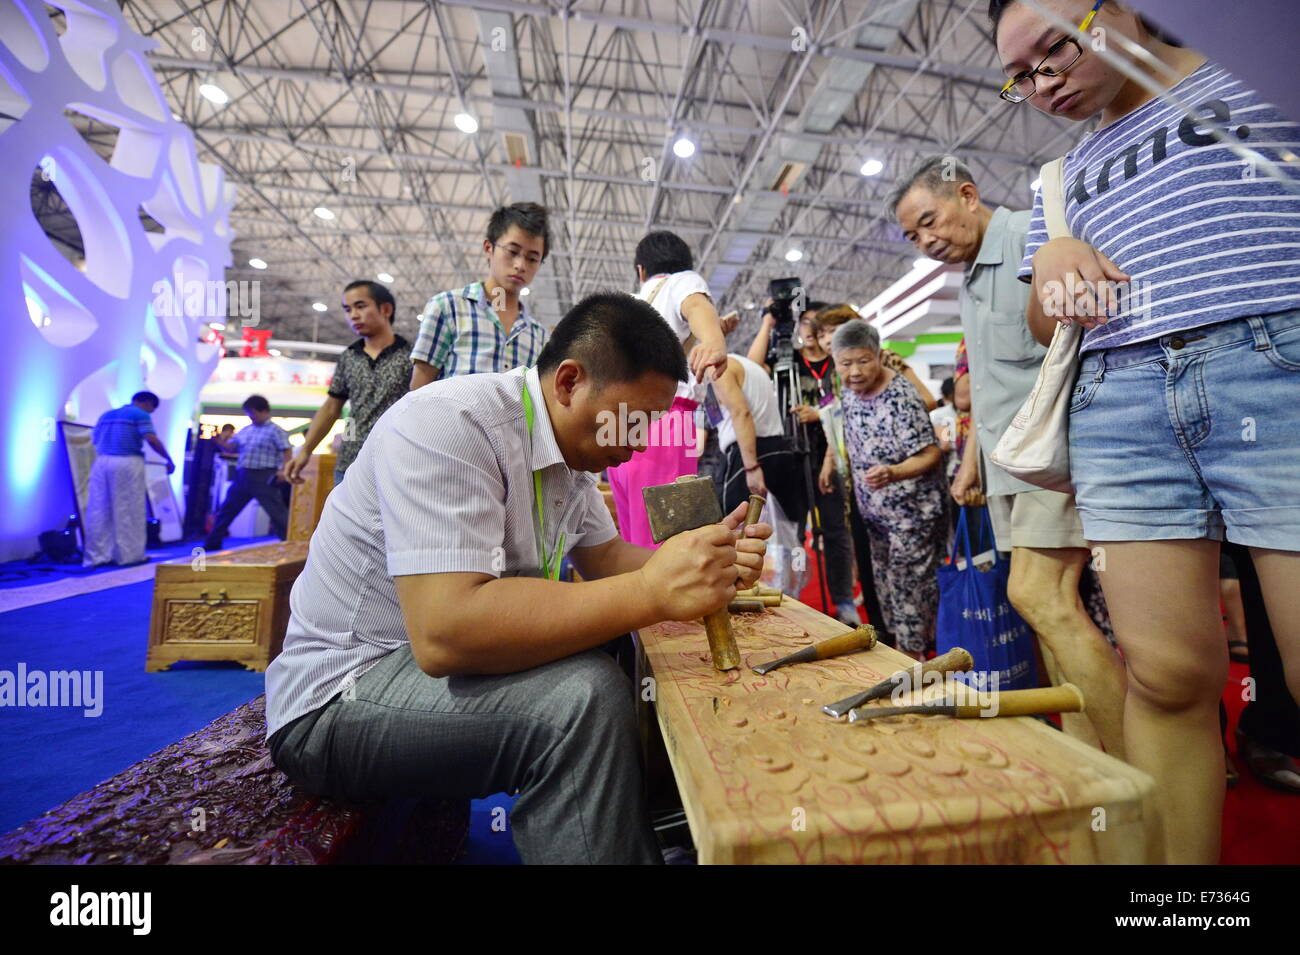 Nanchang, China's Jiangxi Province. 5th Sep, 2014. Visitors watch Yujiang woodcarving during the Jiangxi Tourism Product Fair in Nanchang, capital of east China's Jiangxi Province, Sept. 5, 2014. The three-day fair, which kicked off on Friday, presented more than 3,000 items of Chinese tourism commodities, including 38 intangible cultural heritage items in Jiangxi. © Zhou Mi/Xinhua/Alamy Live News Stock Photo